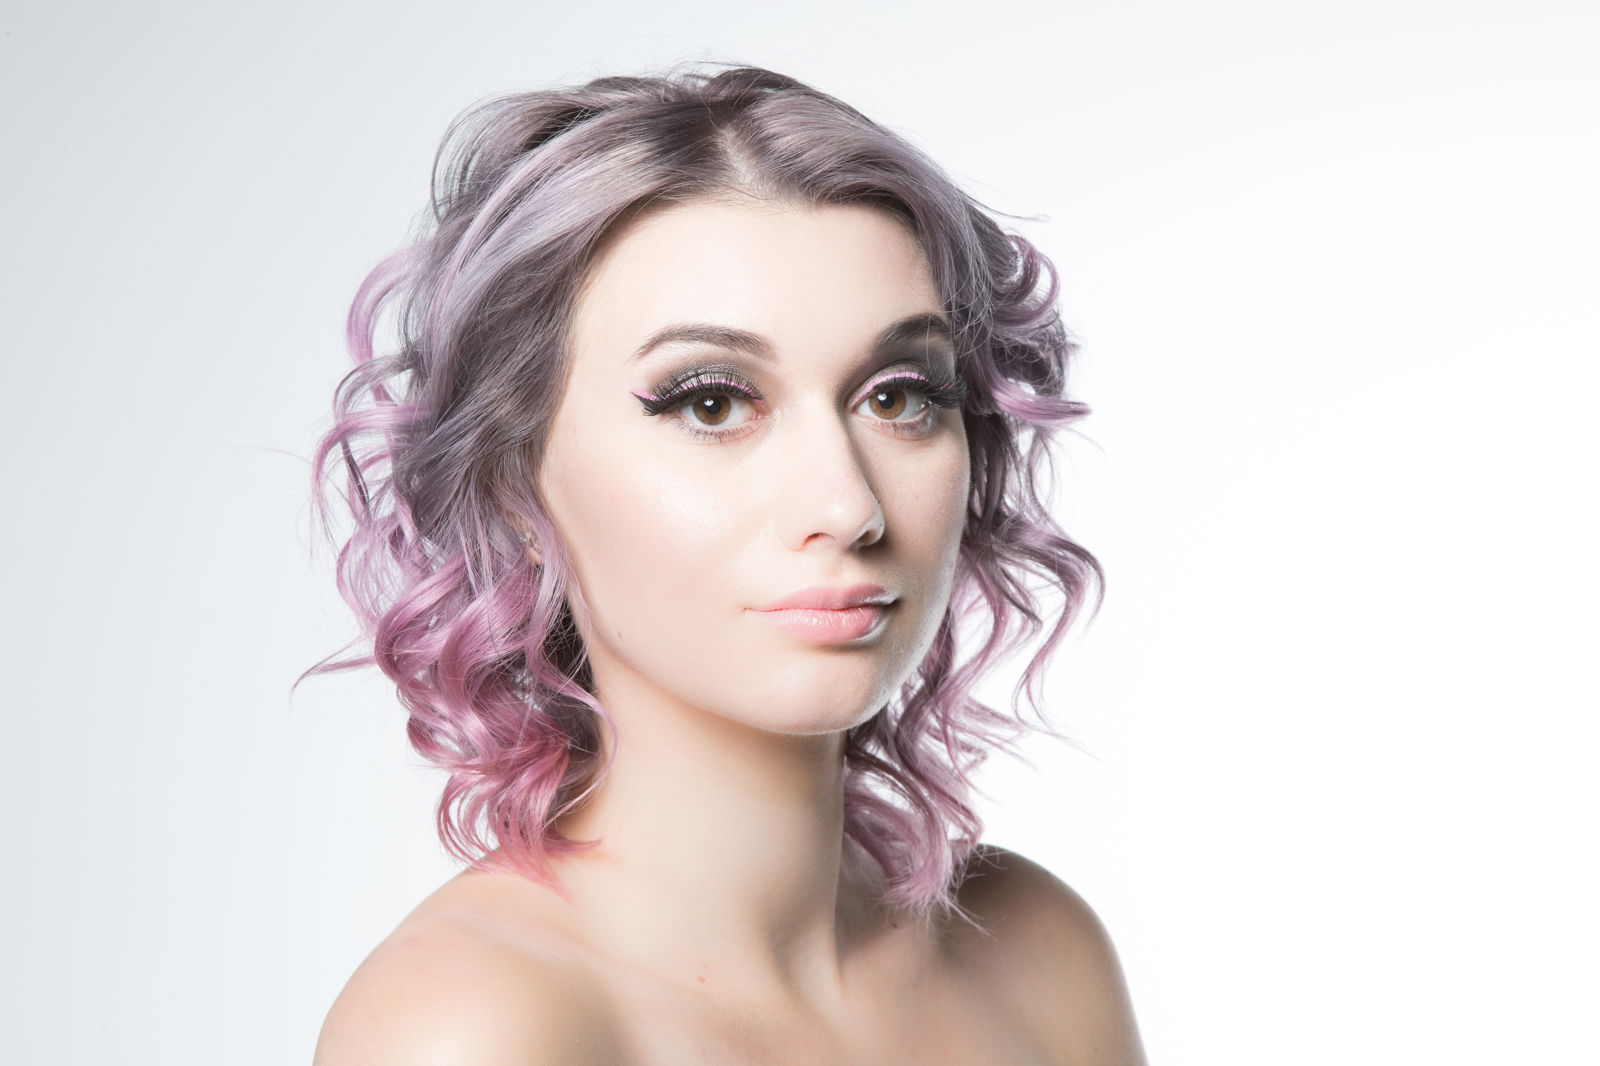 Model with shoulder-length wavy silver-lilac hair fading into pink at the ends.